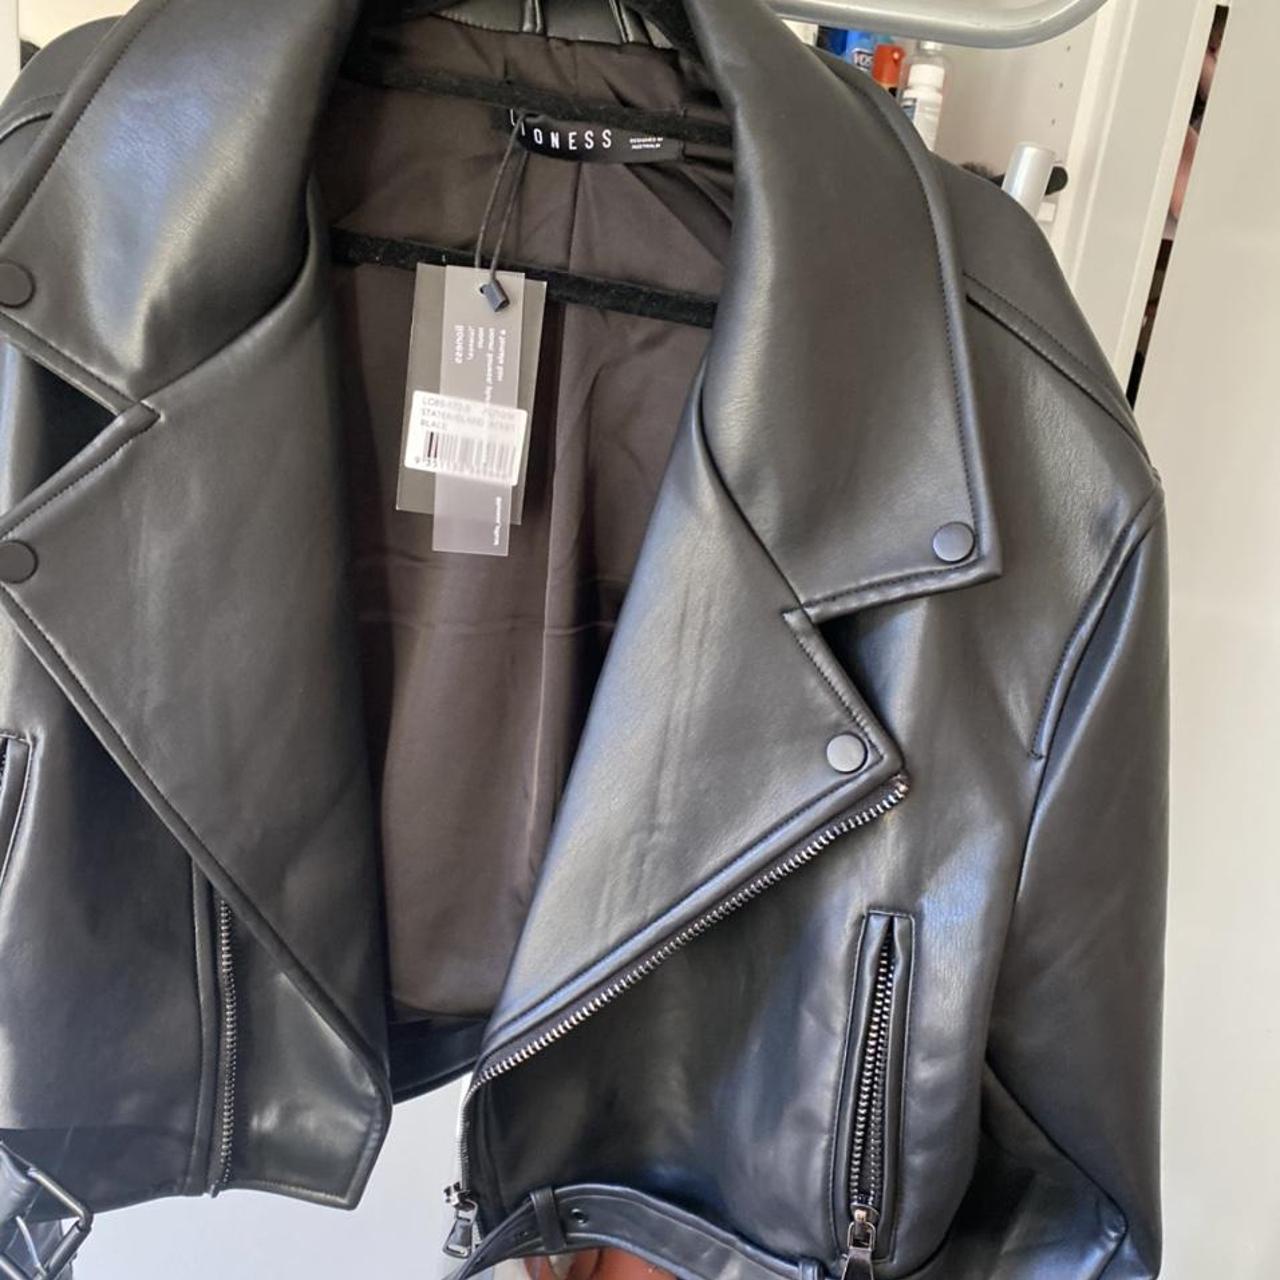 THE STATEN ISLAND JACKET IS THE PERFECT LEATHER... - Depop